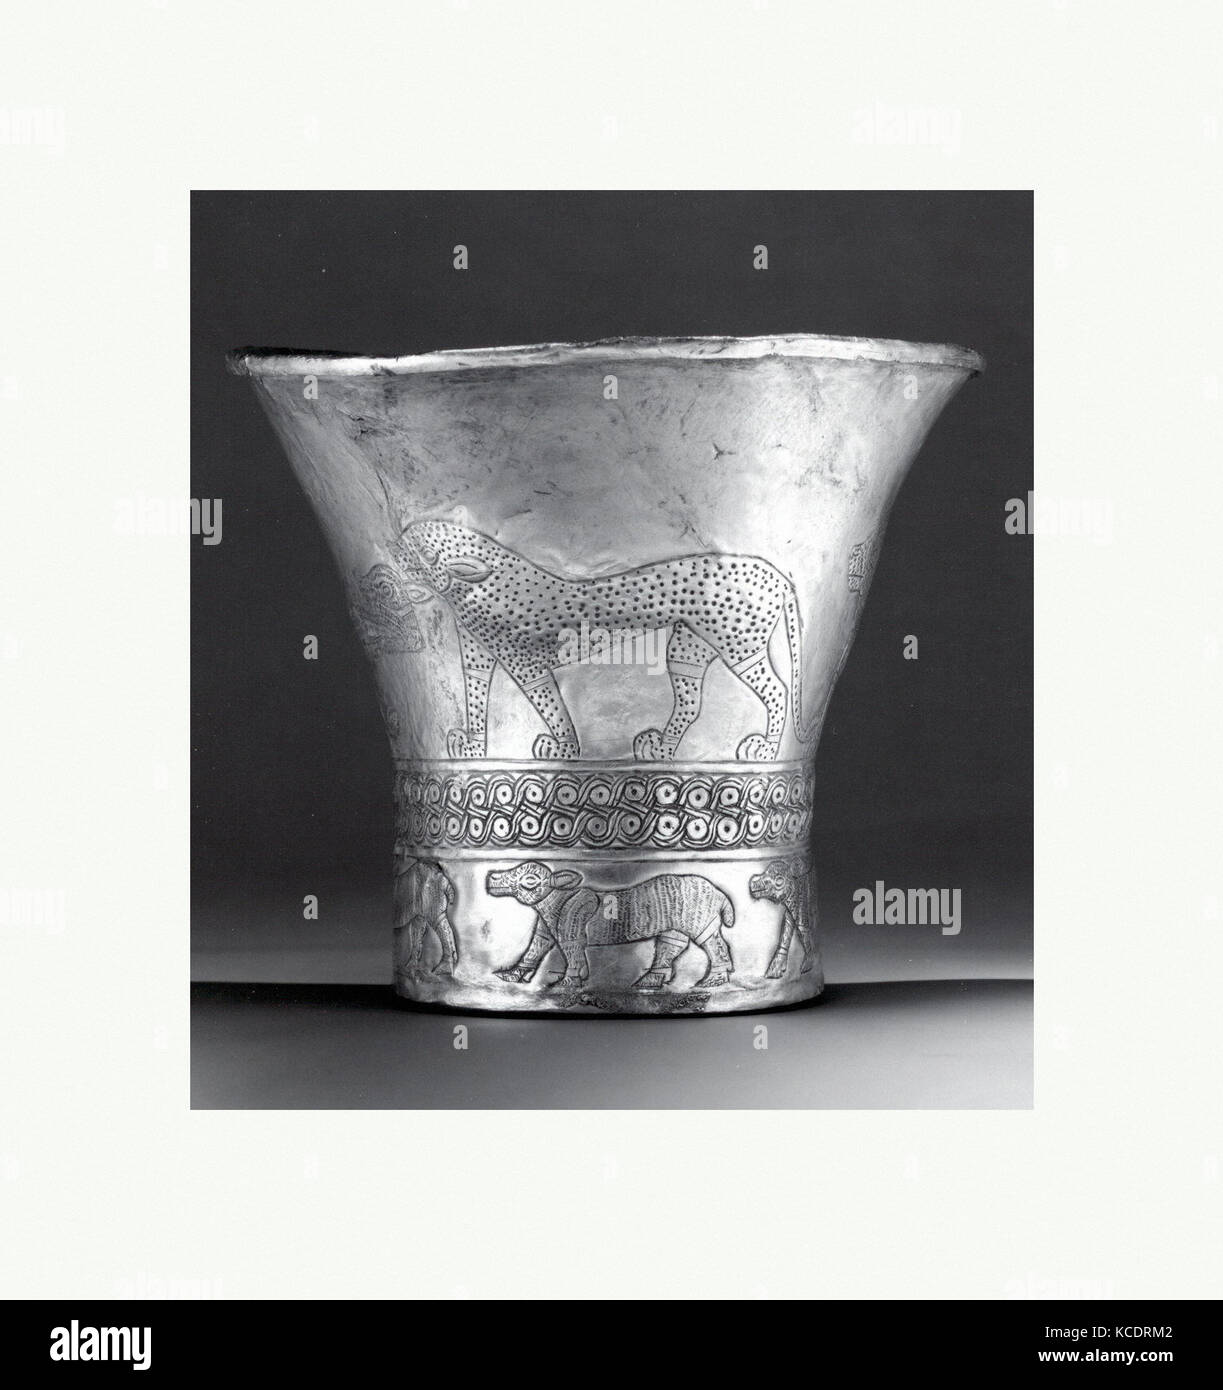 Cup, Early Bronze Age (?), 3rd Millennium BC (?), Syria, Silver, 4.04 in. (10.26 cm), Metalwork-Vessels-Inscribed Stock Photo